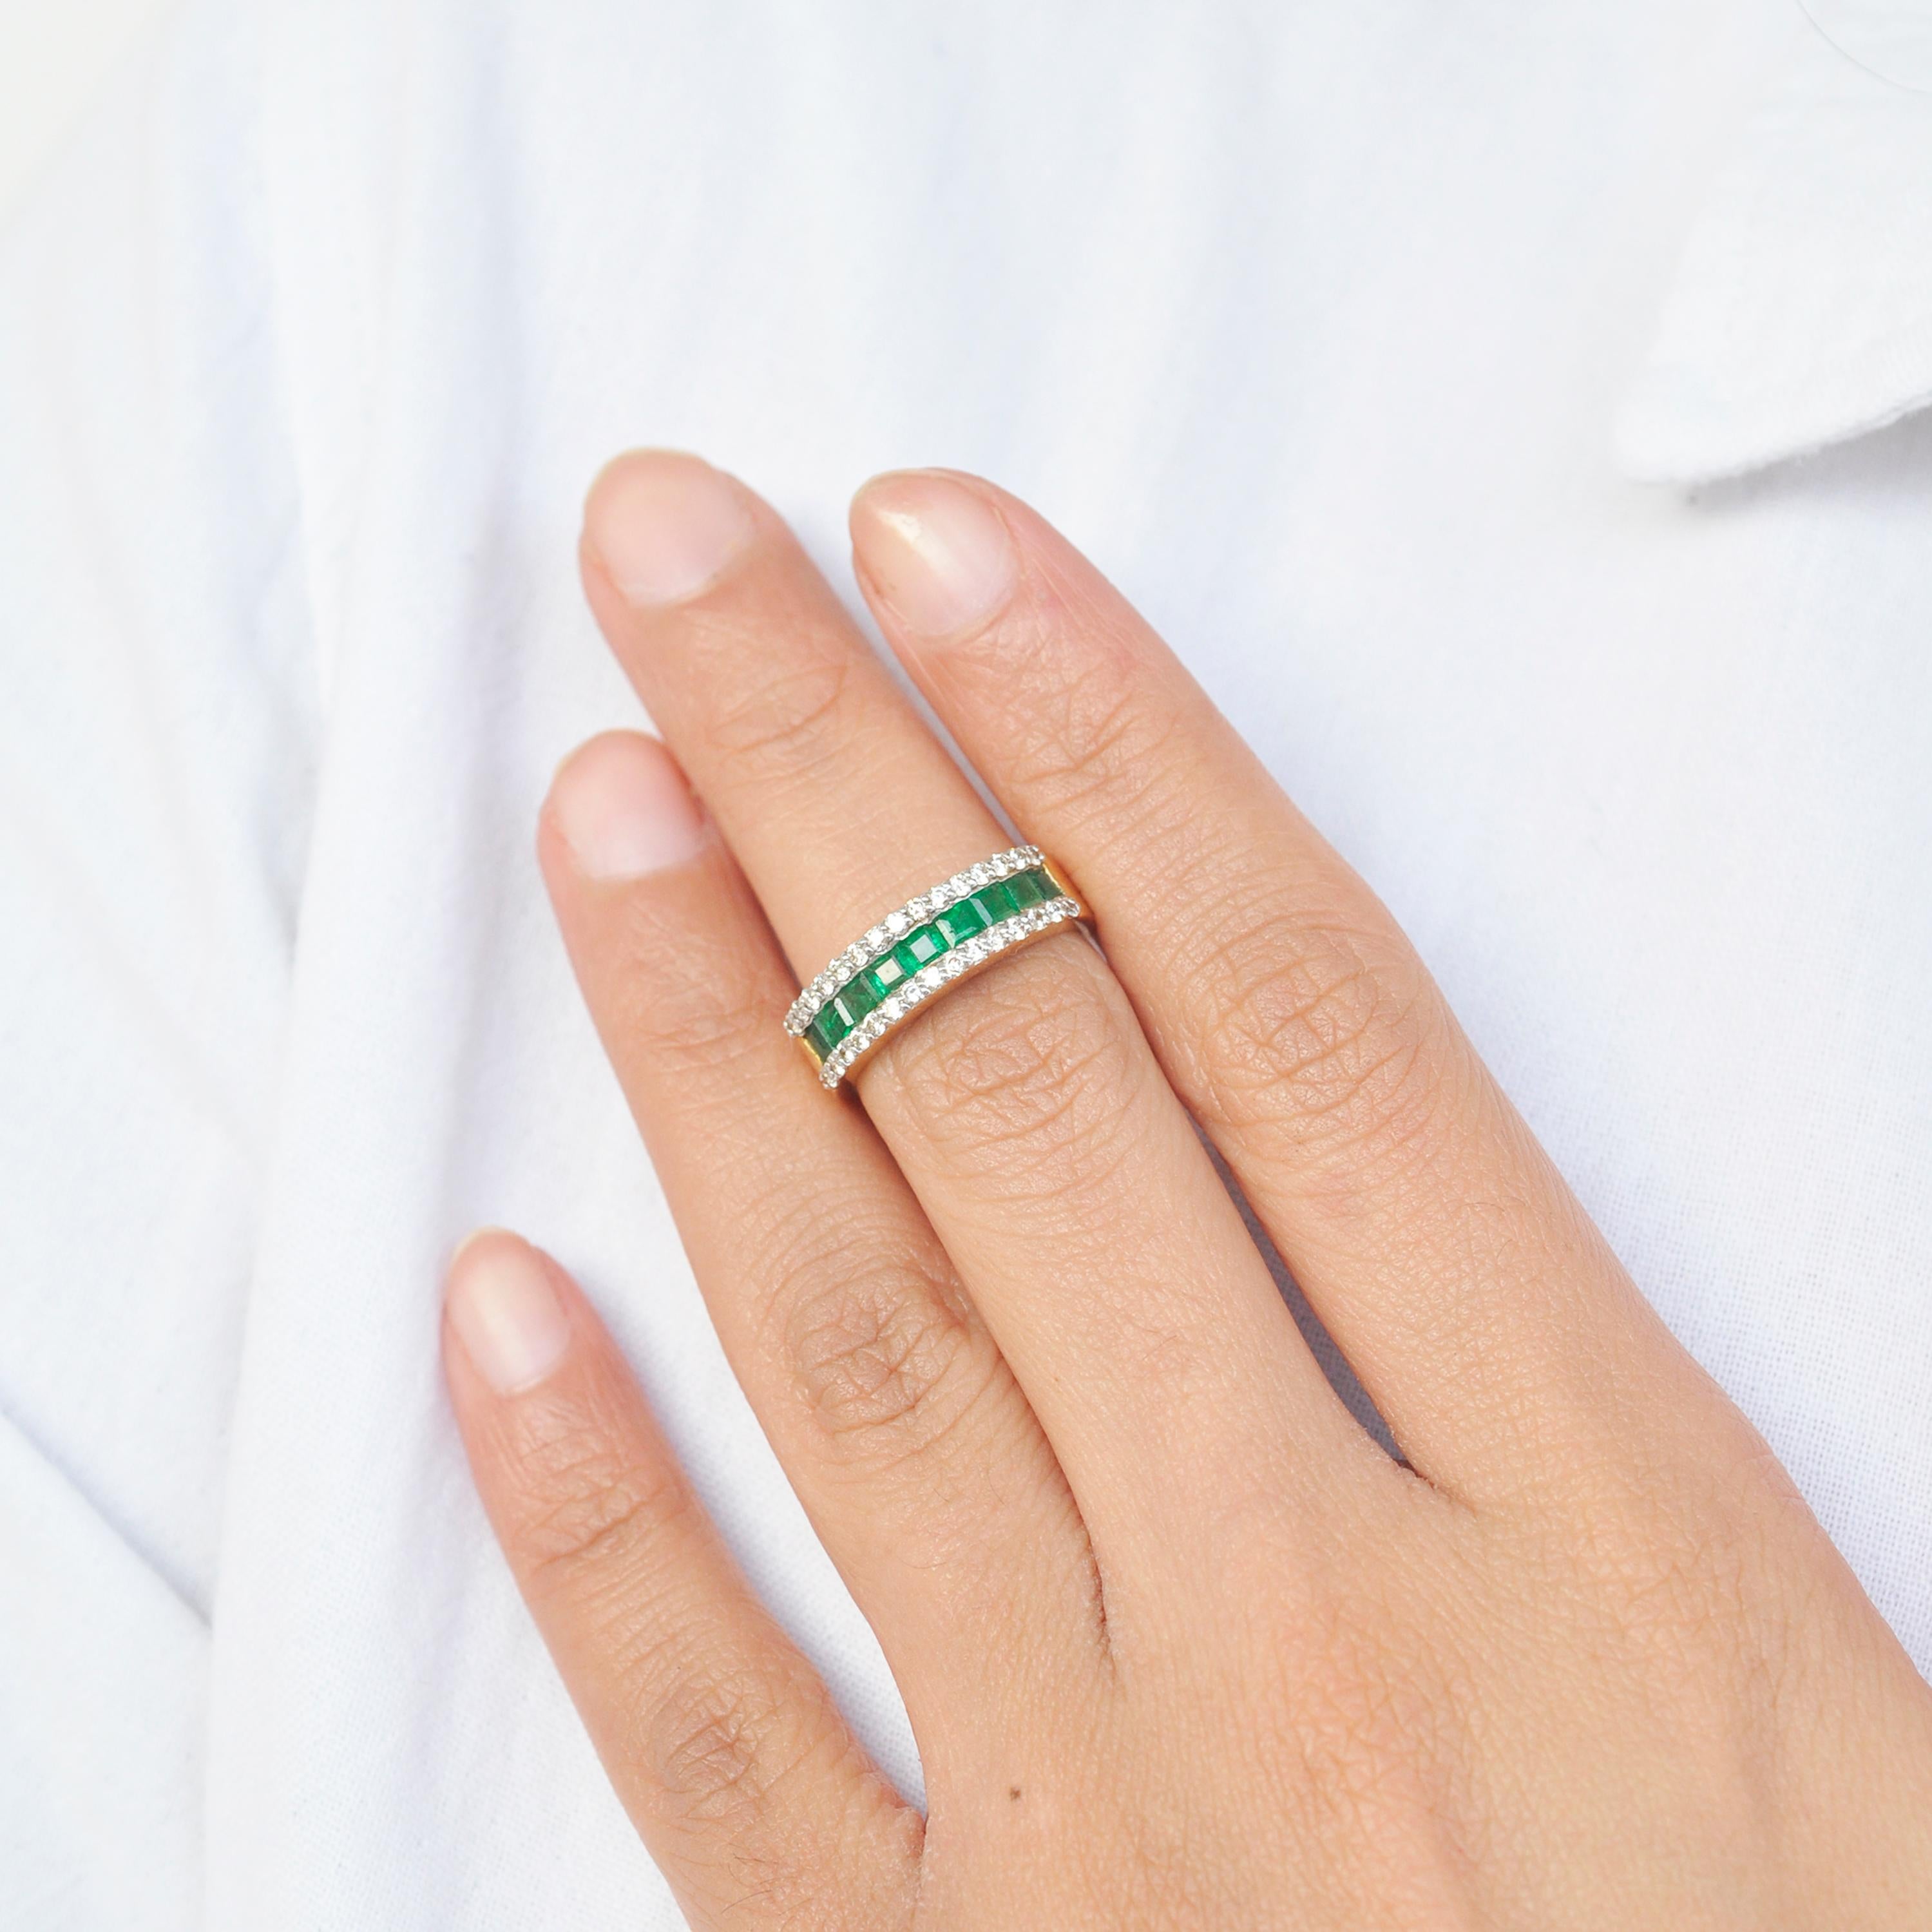 18 karat gold channel set emerald step cut sandawana emerald diamond linear band ring.

This beautiful linear band ring with lustrous sandawana emeralds from Zimbabwe are extremely spectacular. Elegance and chic in one, this ring features good